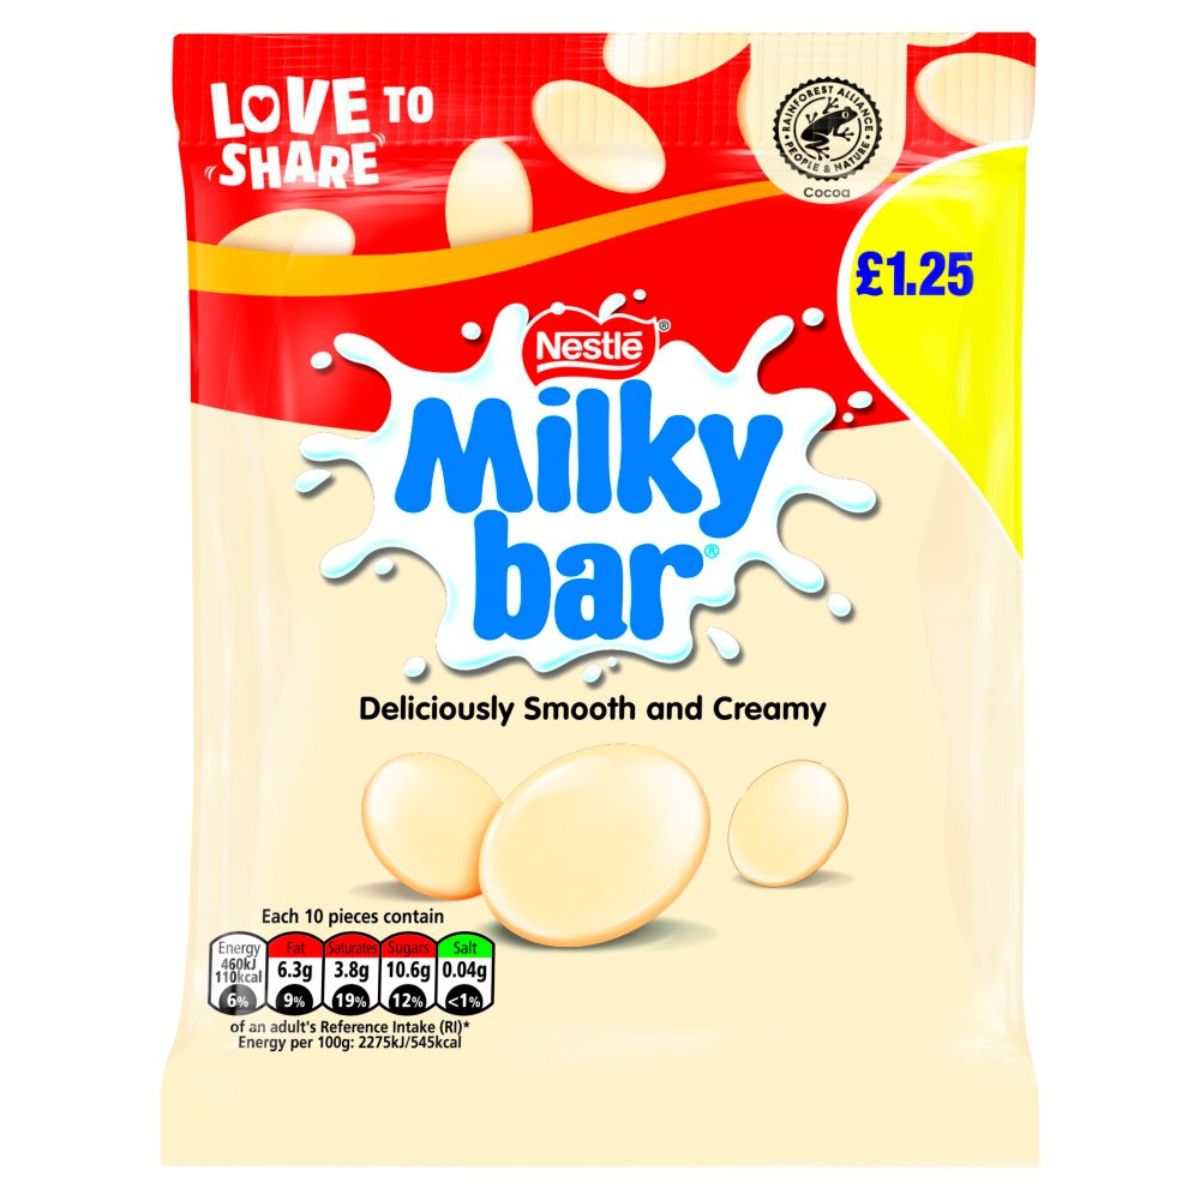 A bag of Nestle - Milky Bar Deliciously Smooth and Creamy - 85g on a white background.